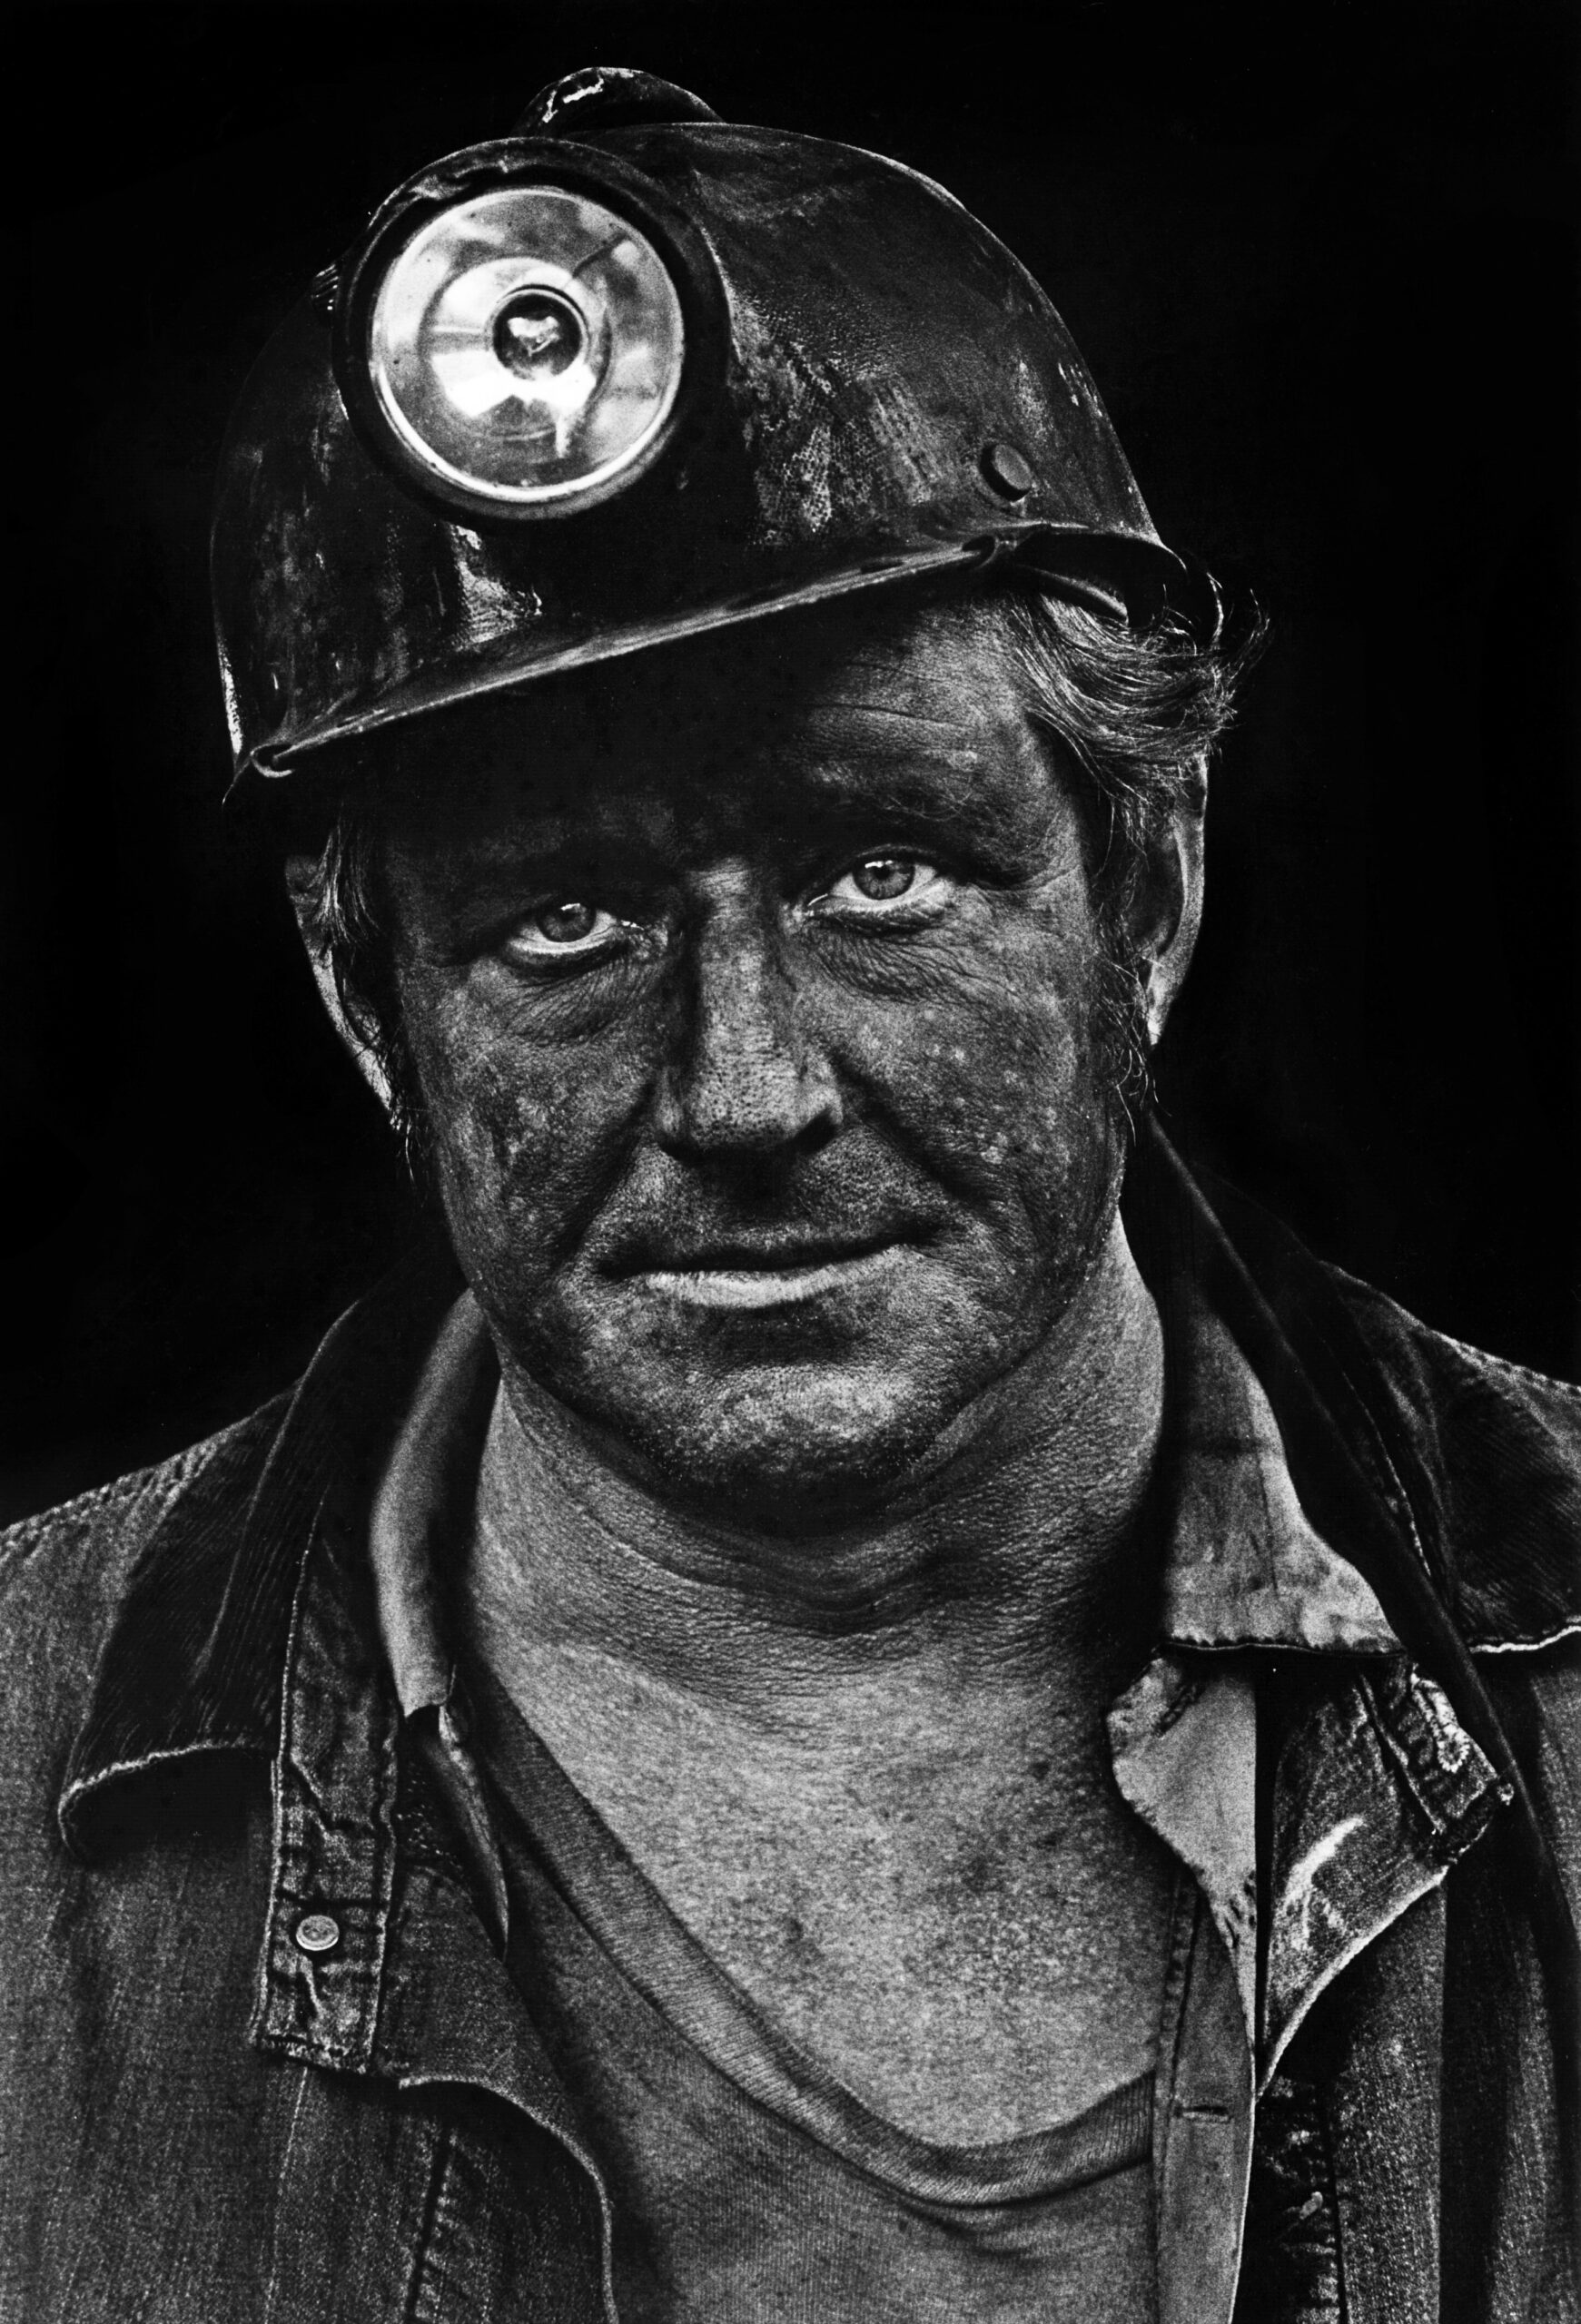 Coal miner Lee Hipshire looks into camera with coal dust on his face